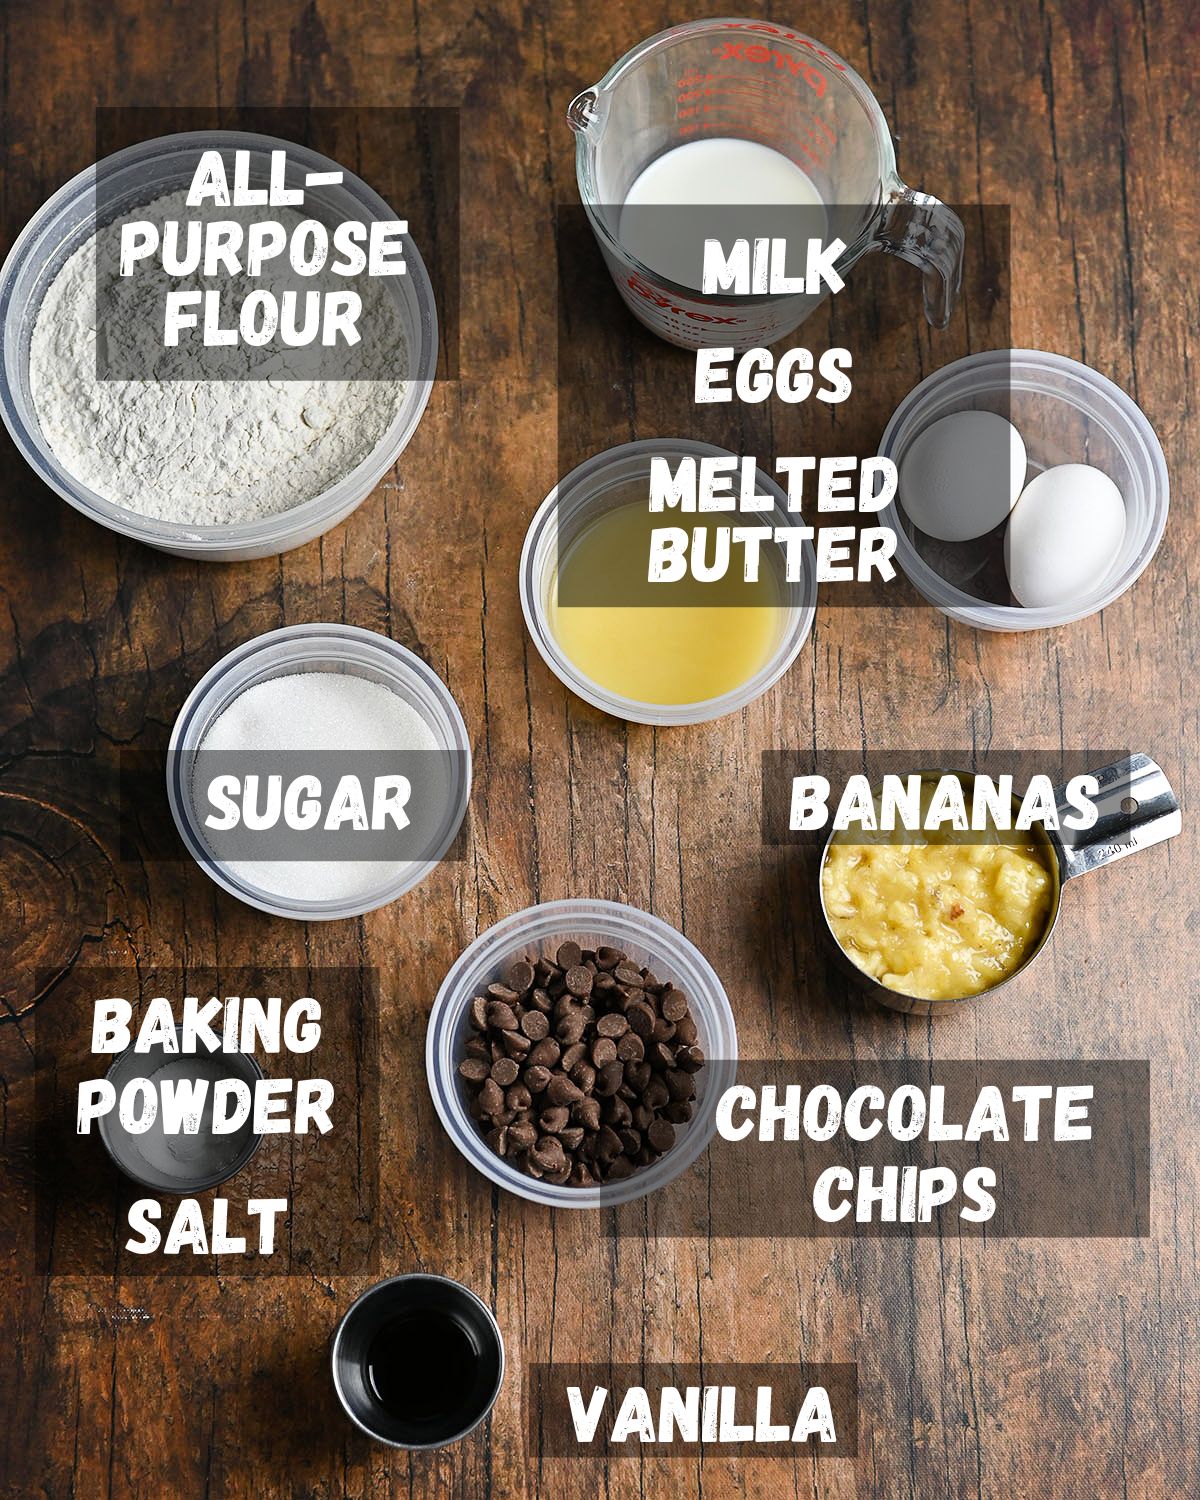 Labeled ingredients to make muffins.